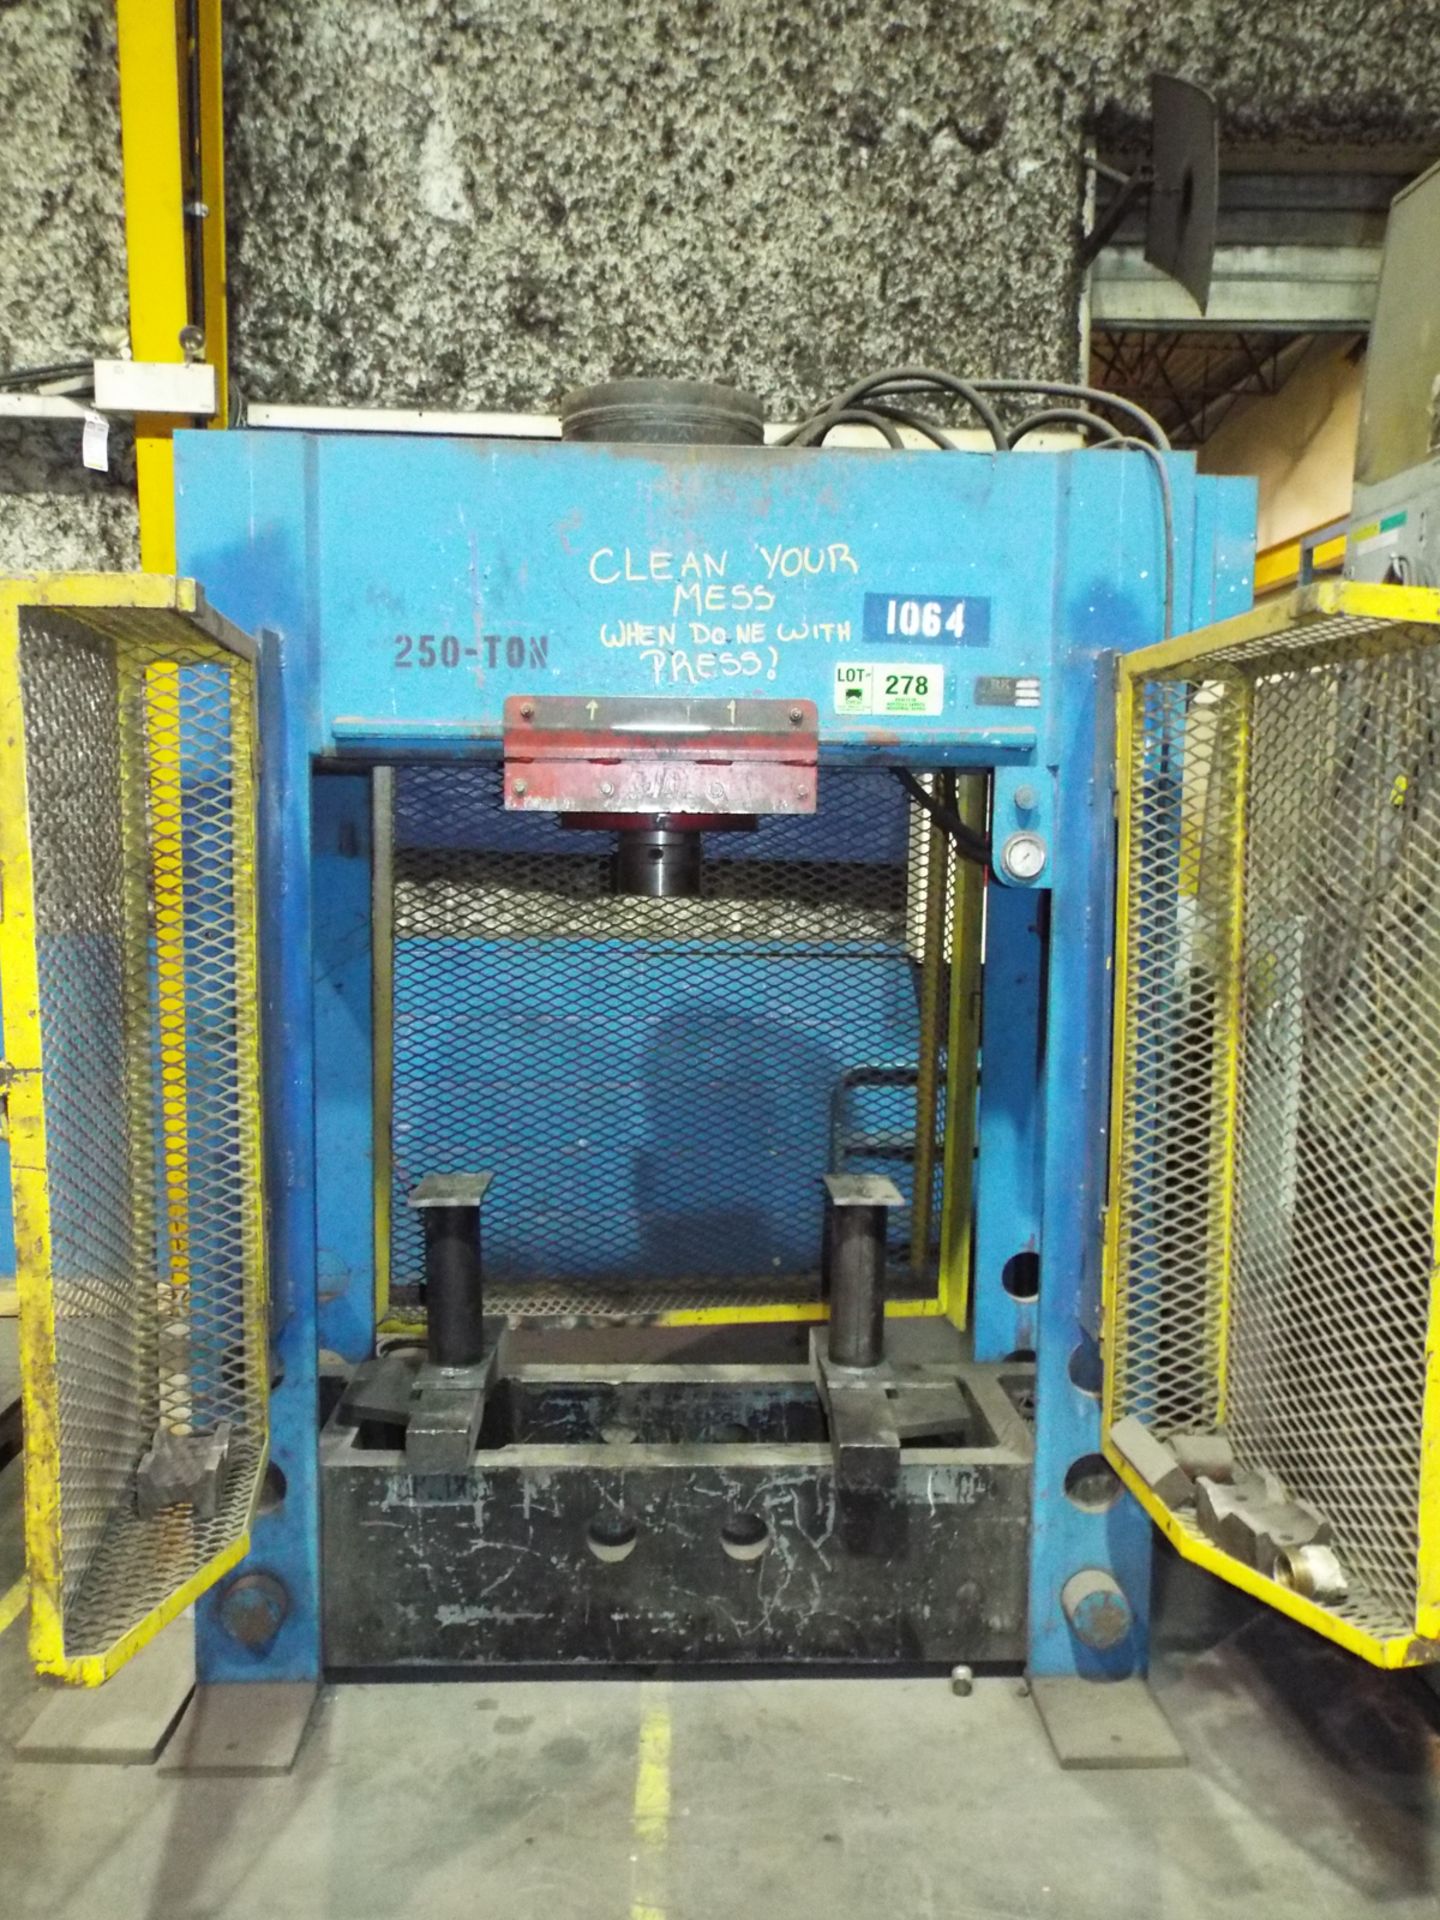 RK MACHINERY SINGLE PISTON HYDRAULIC H-FRAME SHOP PRESS WITH 250 TON CAPACITY, 48" BETWEEN POSTS,